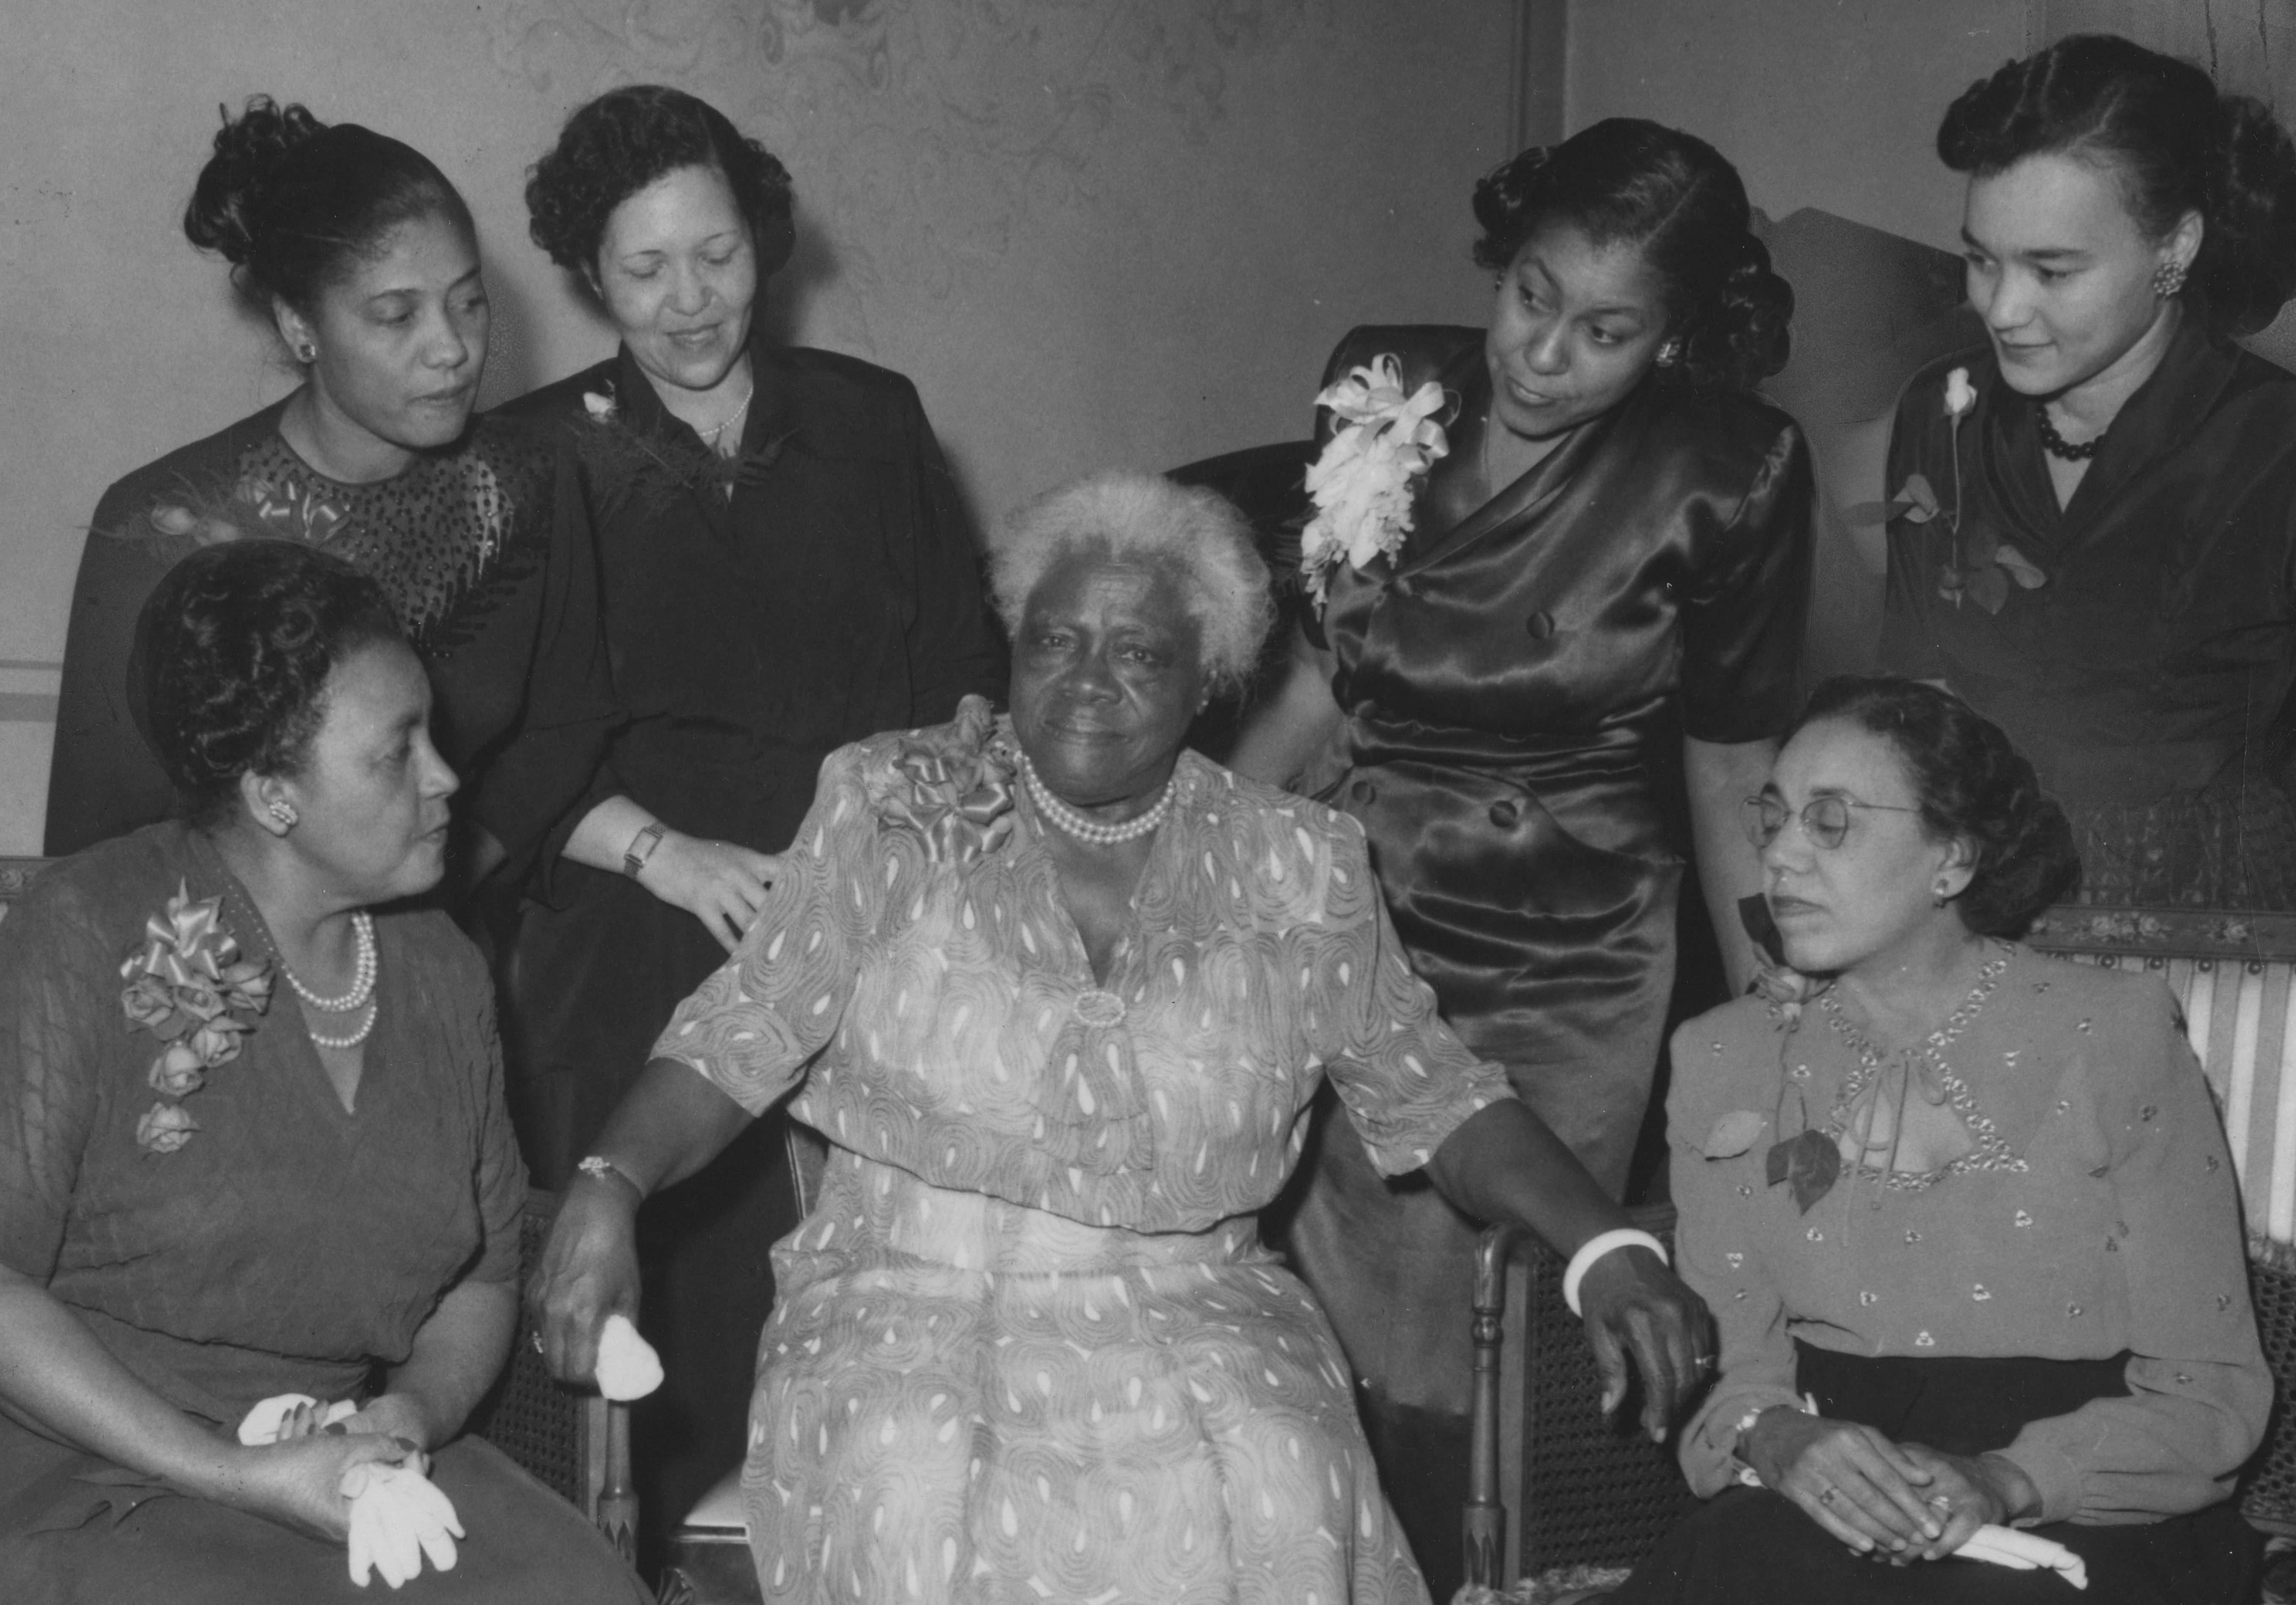 Women from North Carolina, including civil rights leader Mary McLeod Bethune, at a meeting of the African American advocacy and professional group National Council of Negro Women, Washington DC